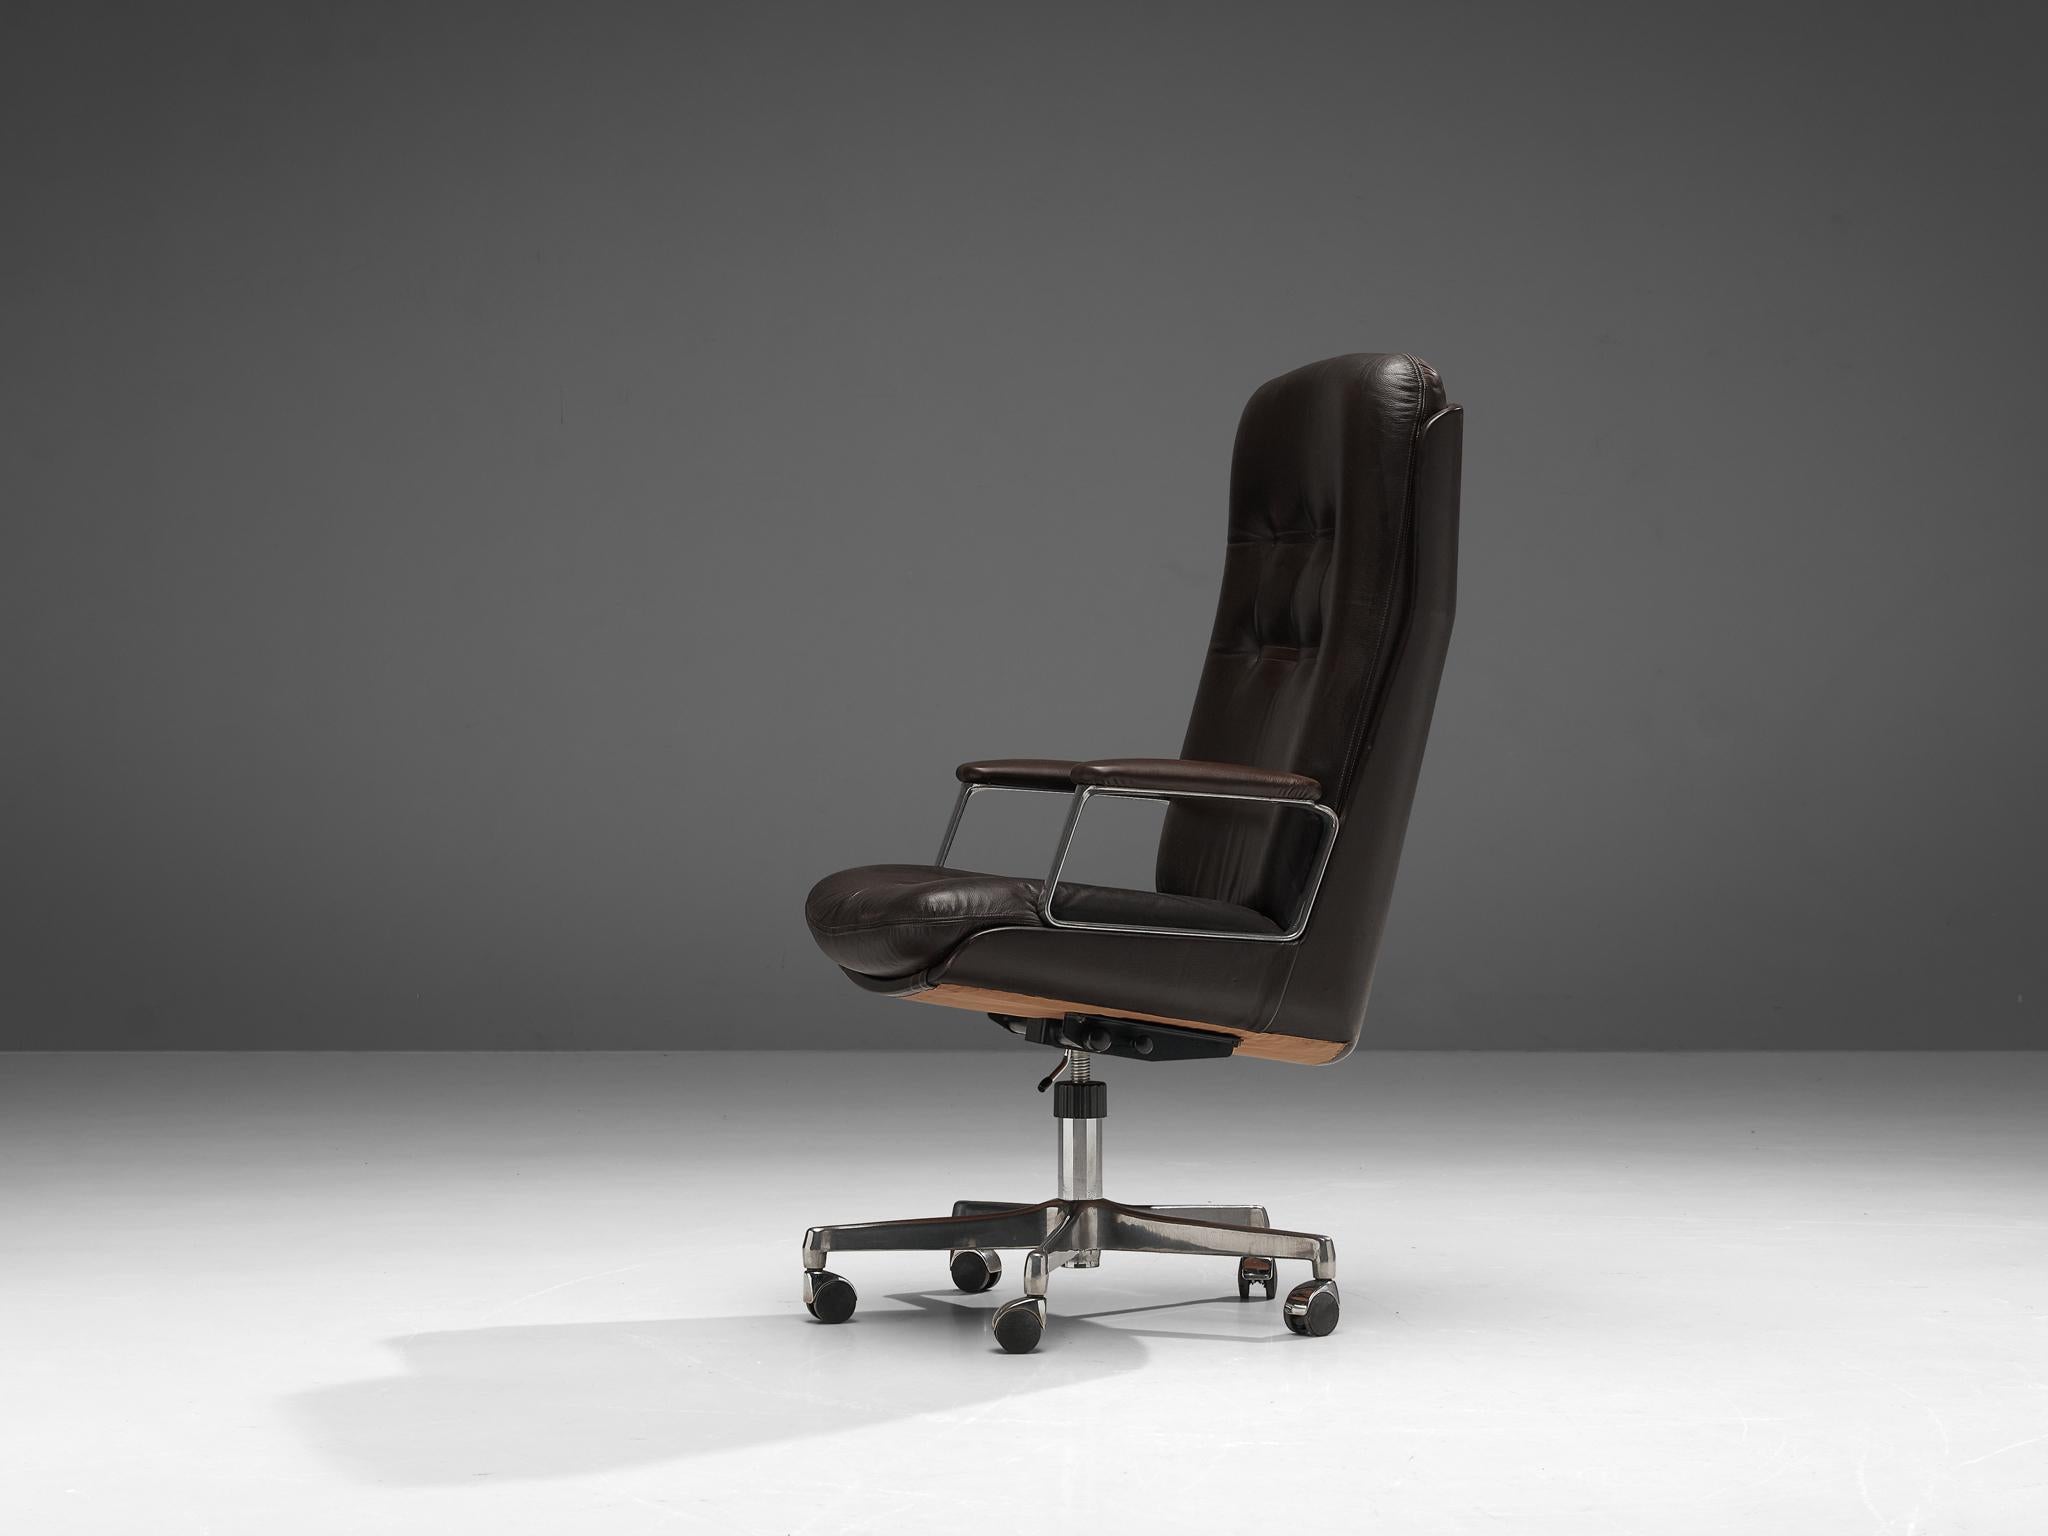 Osvaldo Borsani for Tecno, desk chair, leather, metal, Italy, 1960s

Osvaldo Borsani designed this swivel armchair as an office chair in the 1960s. The chair features a high, comfortable backrest with tufted details. The dark brown leather is also